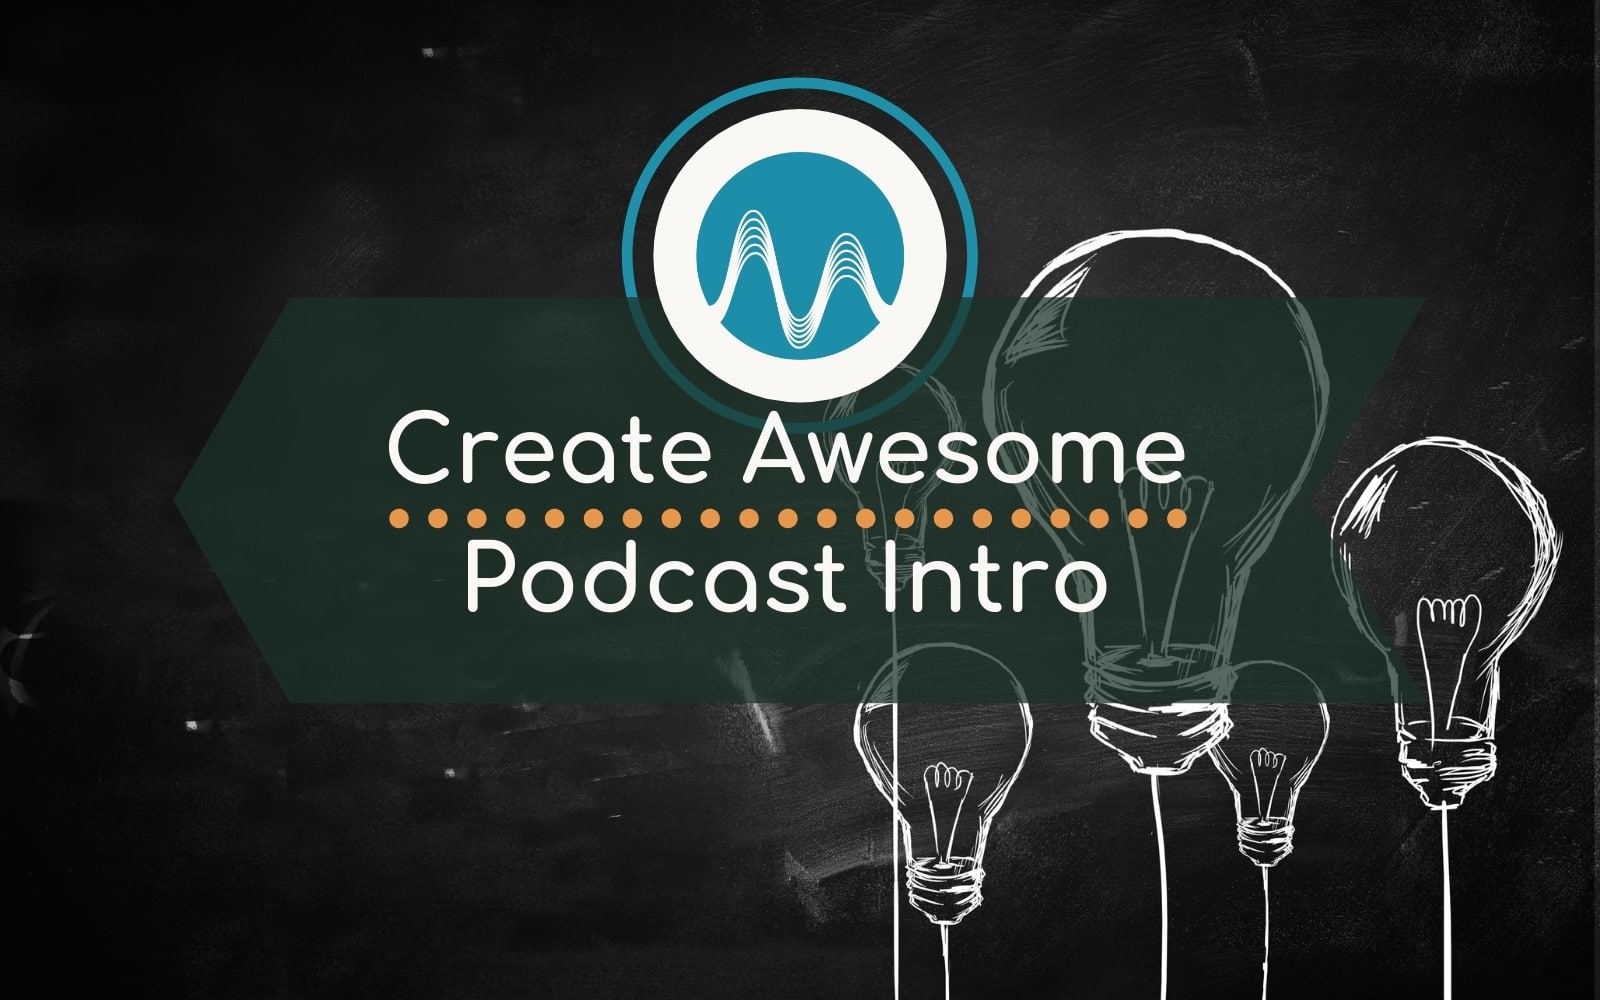 Create Awesome Podcast Intro General podcast intro Music Radio Creative